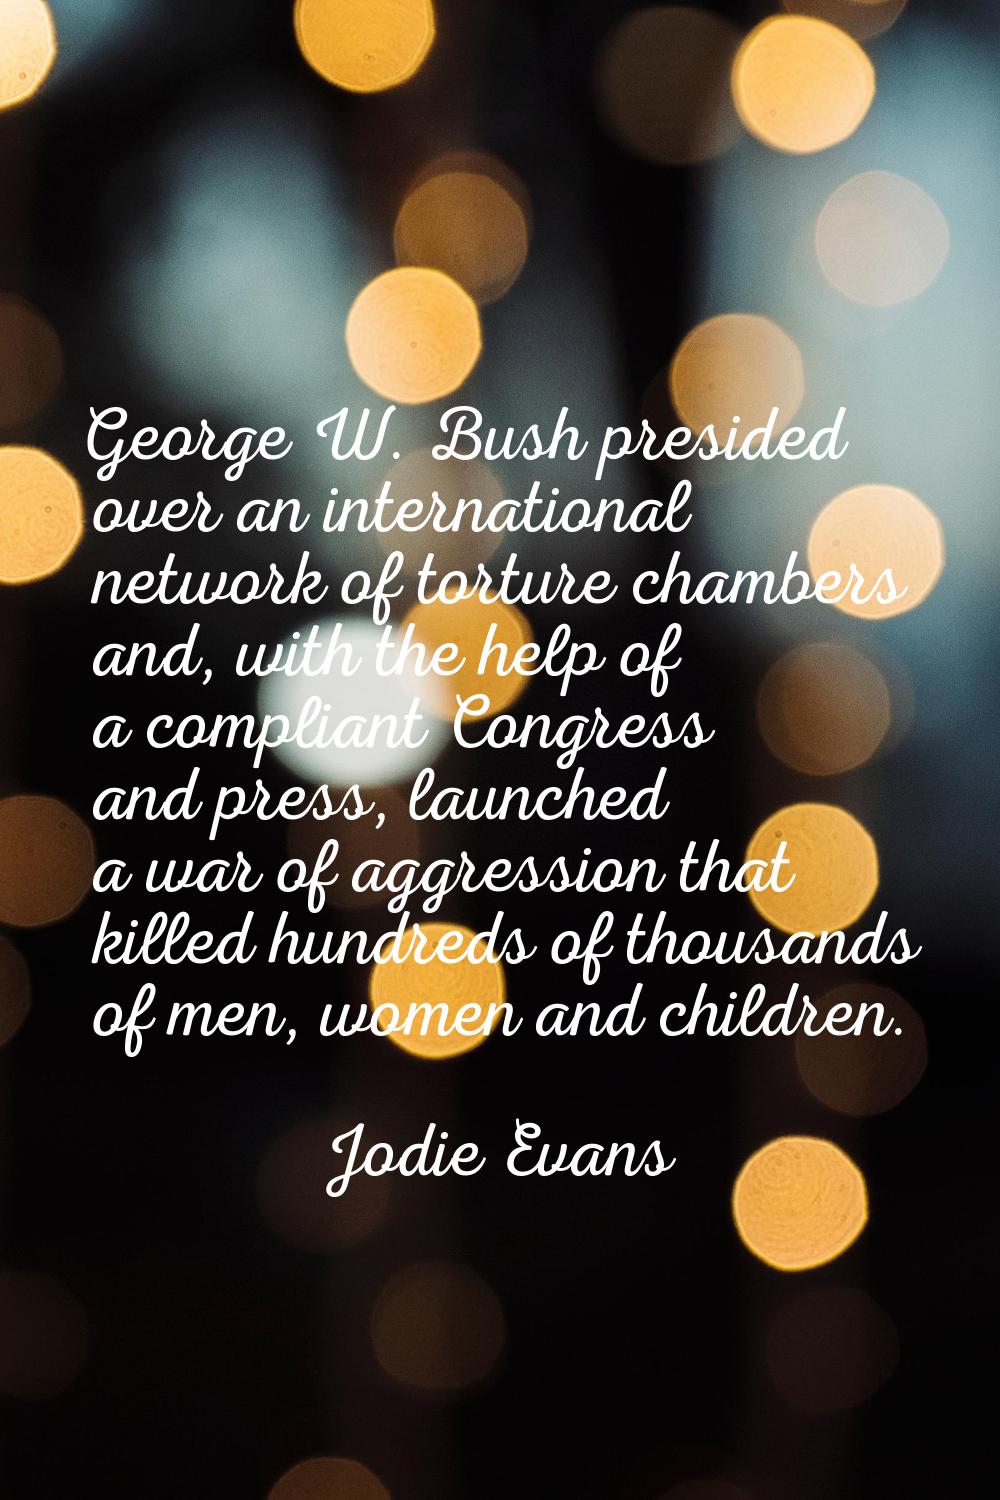 George W. Bush presided over an international network of torture chambers and, with the help of a c